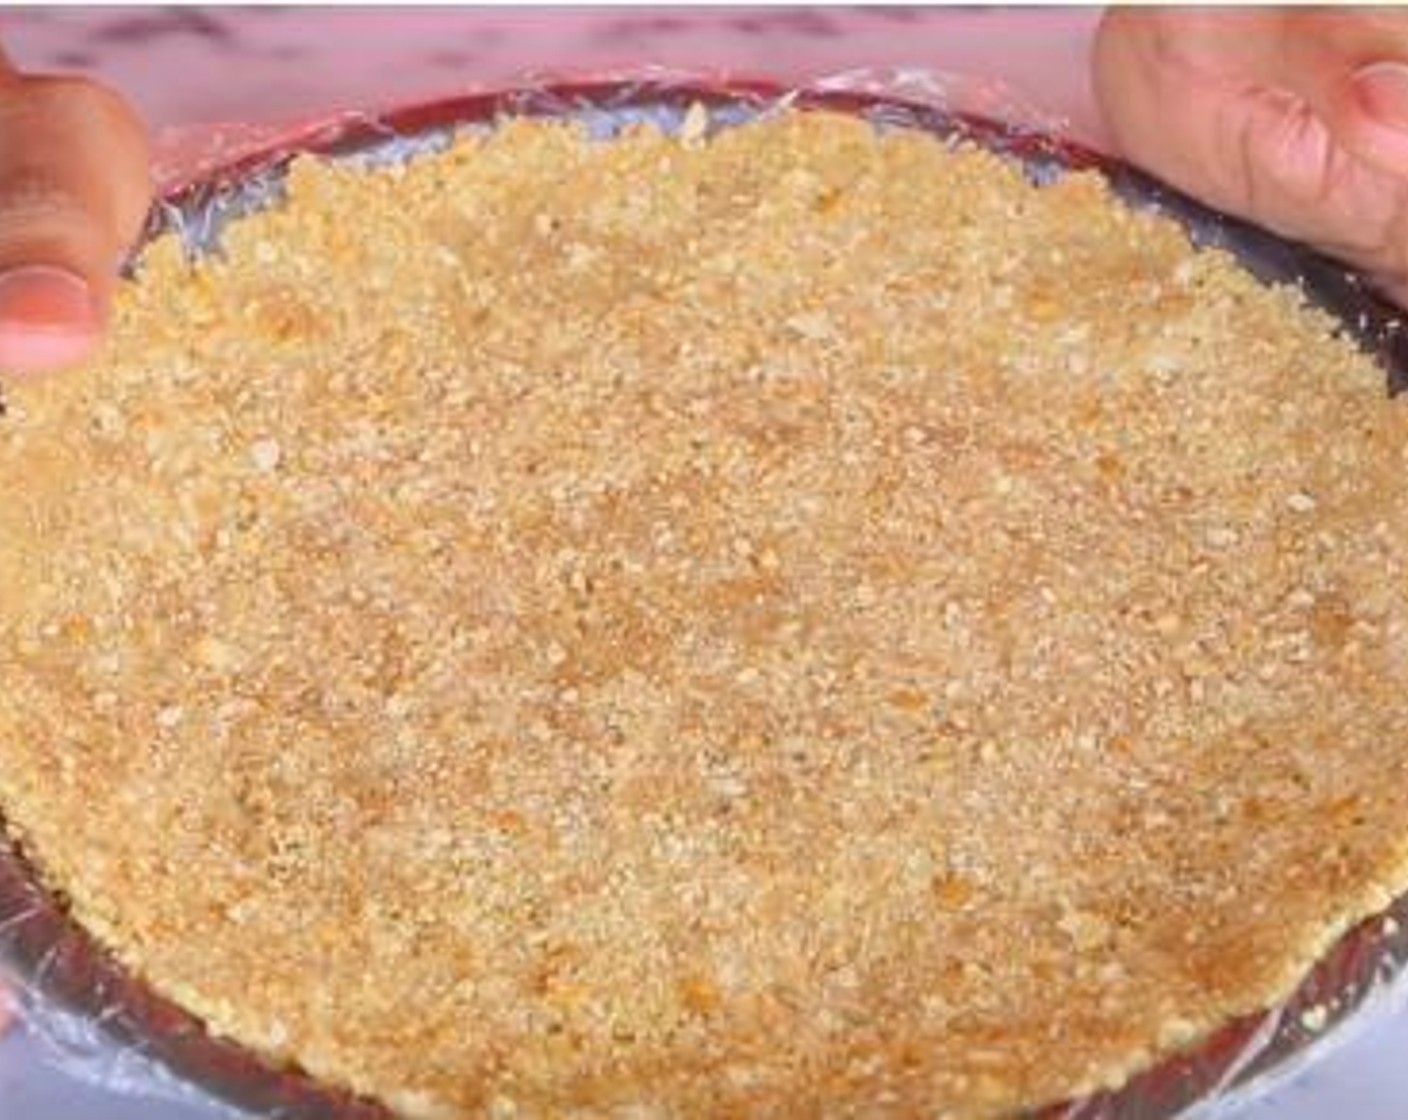 step 1 Inside a bowl, mix together the Graham Cracker Crumbs (1 cup), Butter (1/2 cup) and Caster Sugar (1/4 cup). Then place and the mixture inside a pie tin lined with a plastic paper, pop it in the fridge until you are ready to use it.